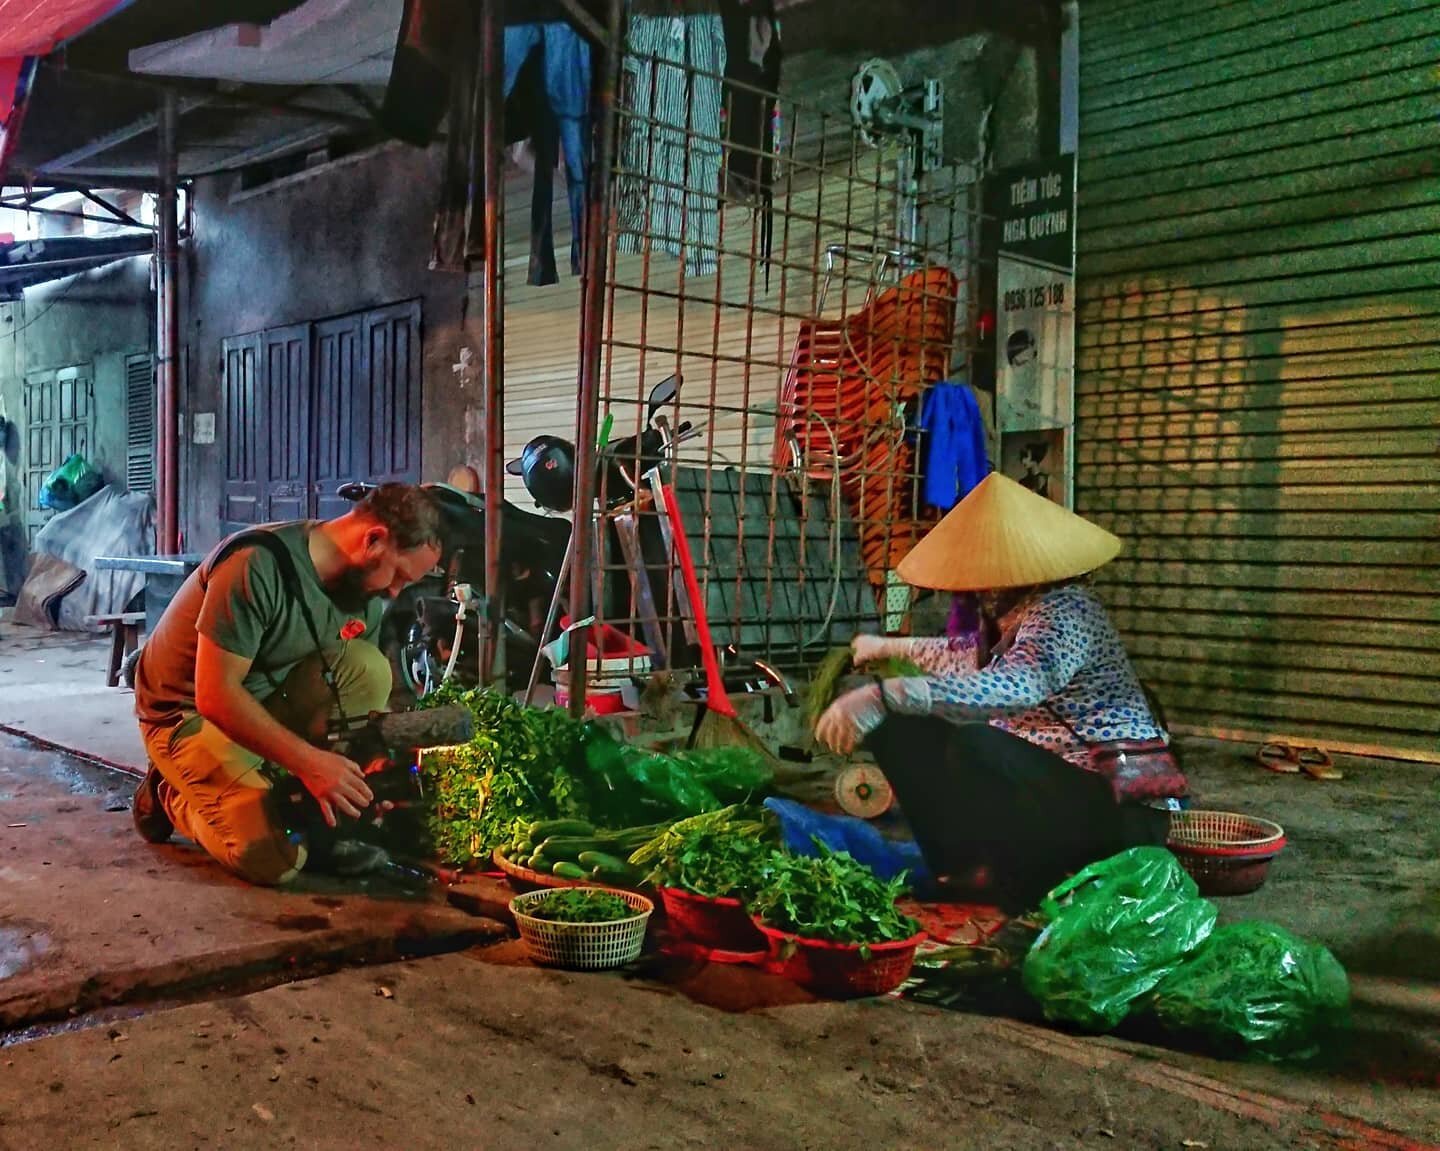 By 6am we had made it to the market. Never been there been there before the vendors are setting up.
.
.
#wanderingsouls #vietnam #liệtsĩ  #martyrs #documentary #filmmaking #haiphong #vietnam #documentaryfilmmaker #documentarylife #v&eacute;rit&eacute